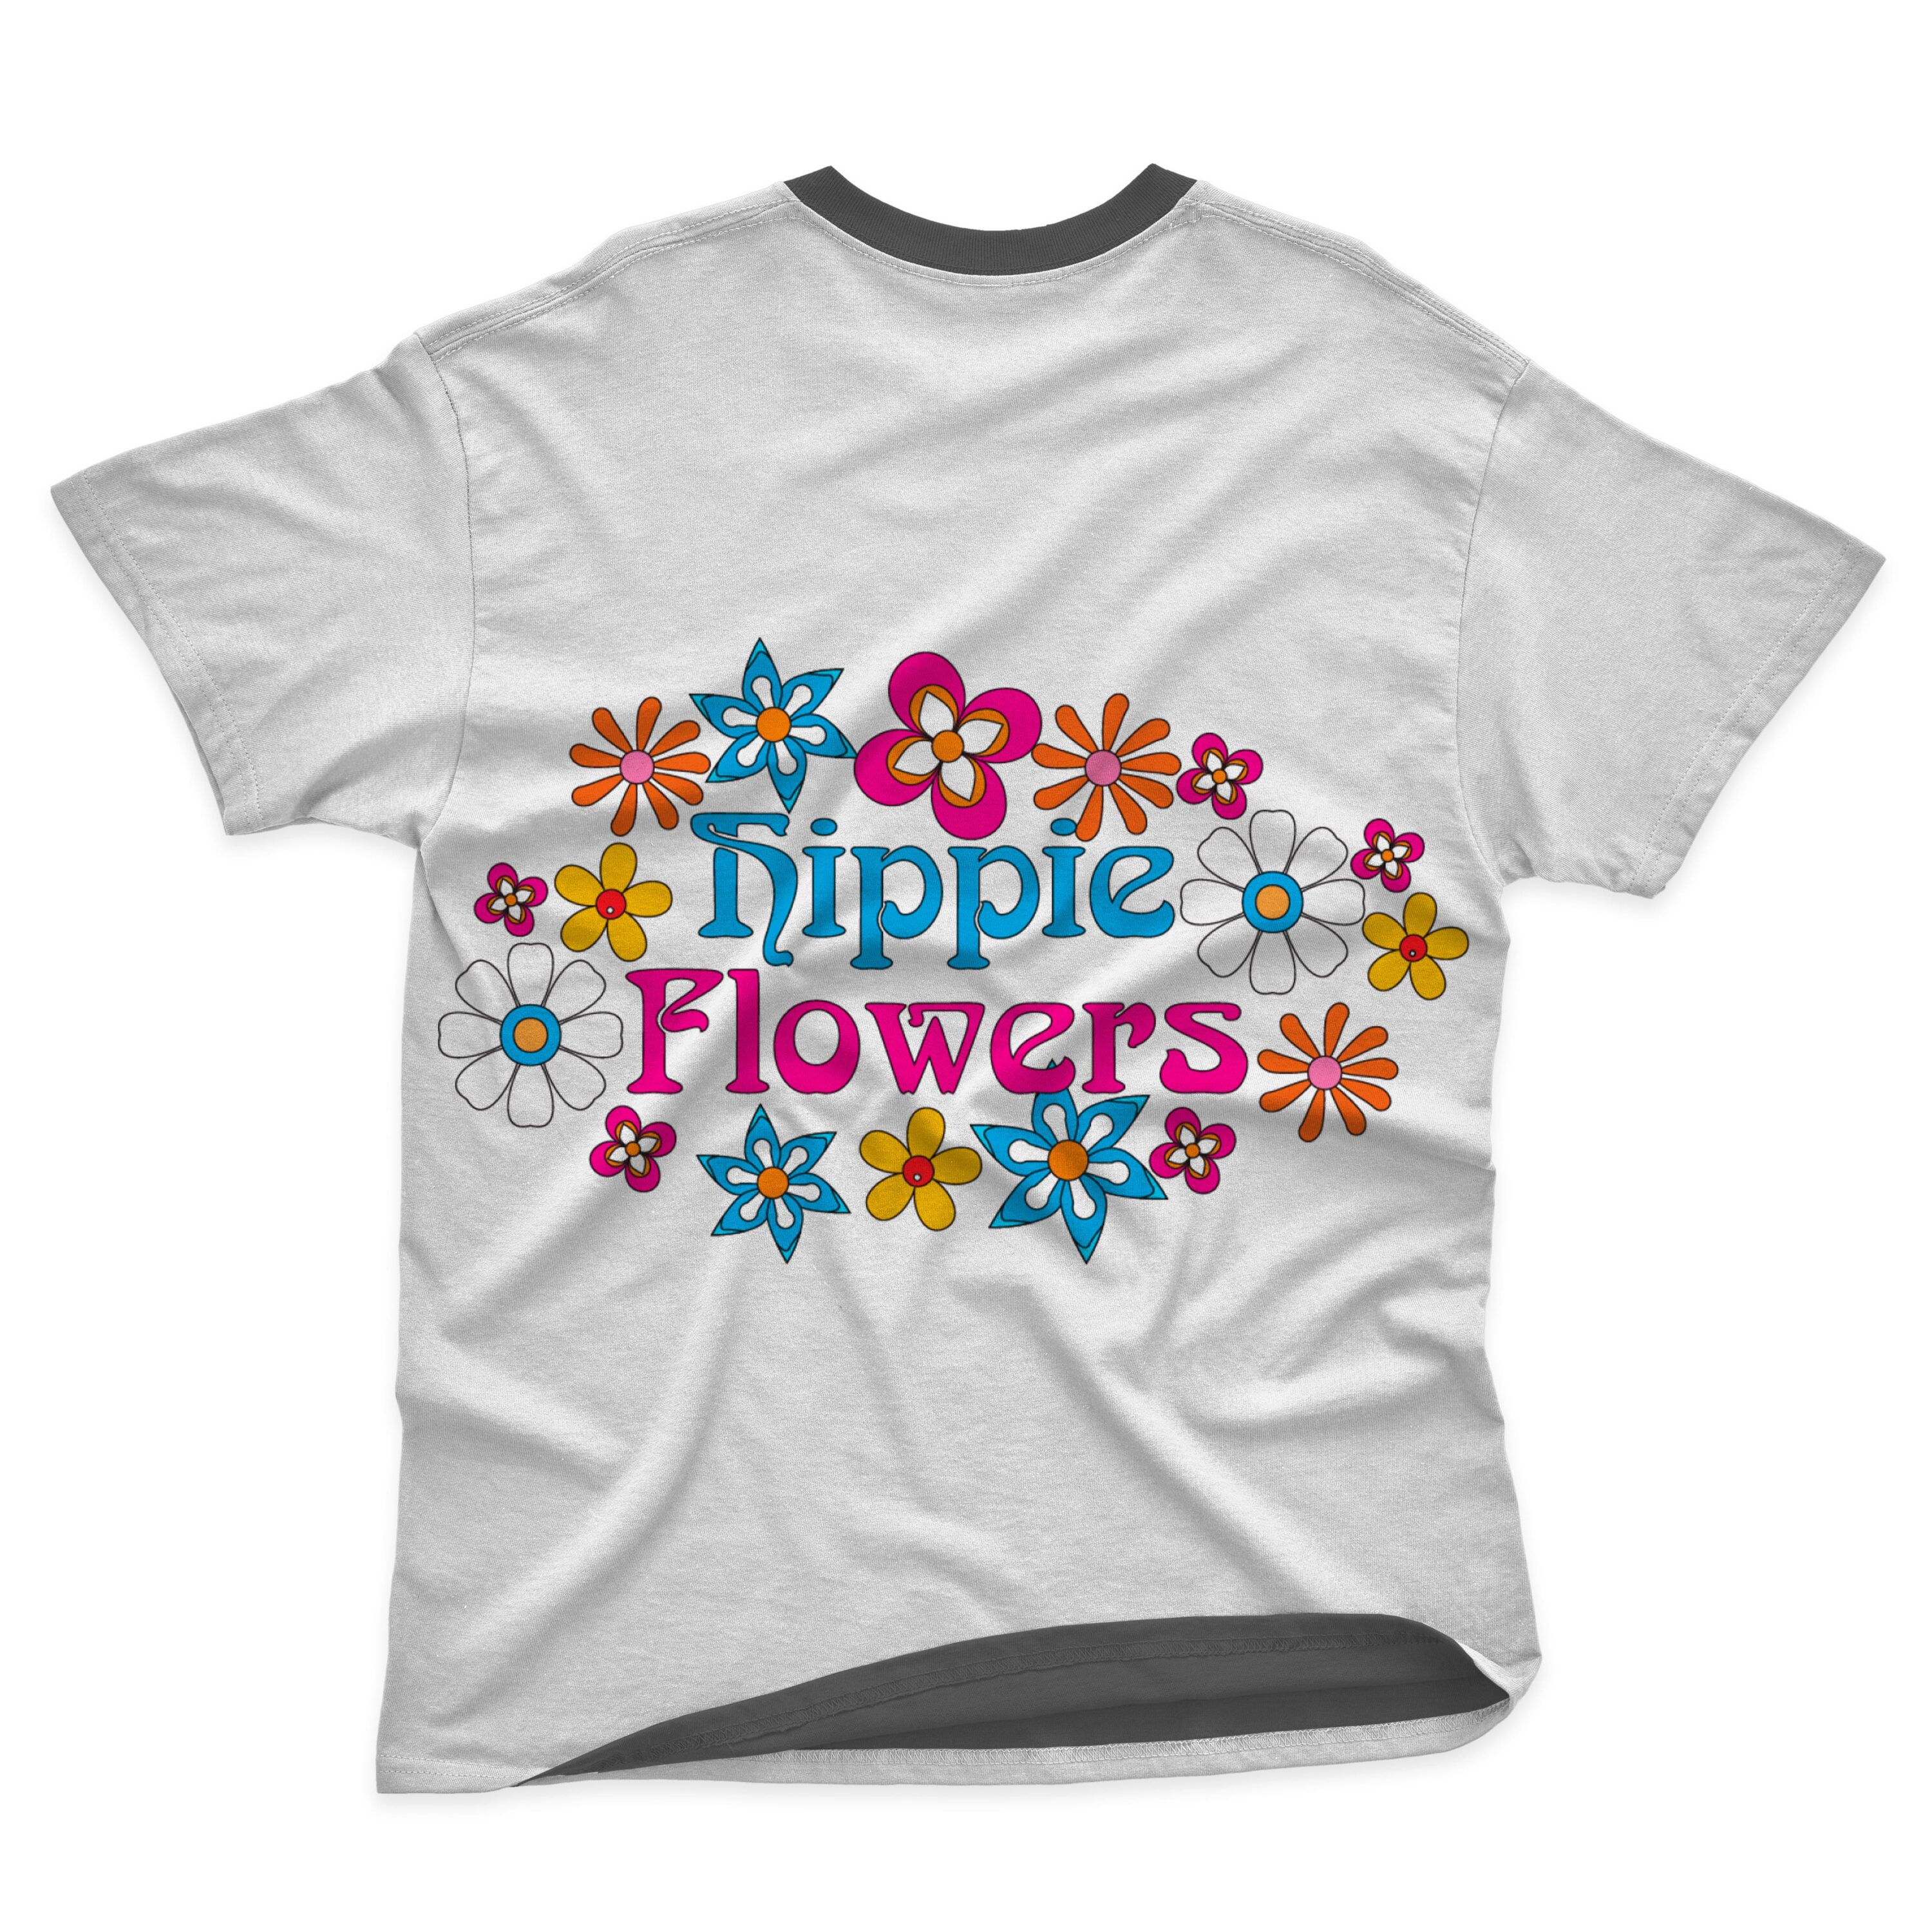 Cute hippie flowers quote on the t-shirt.